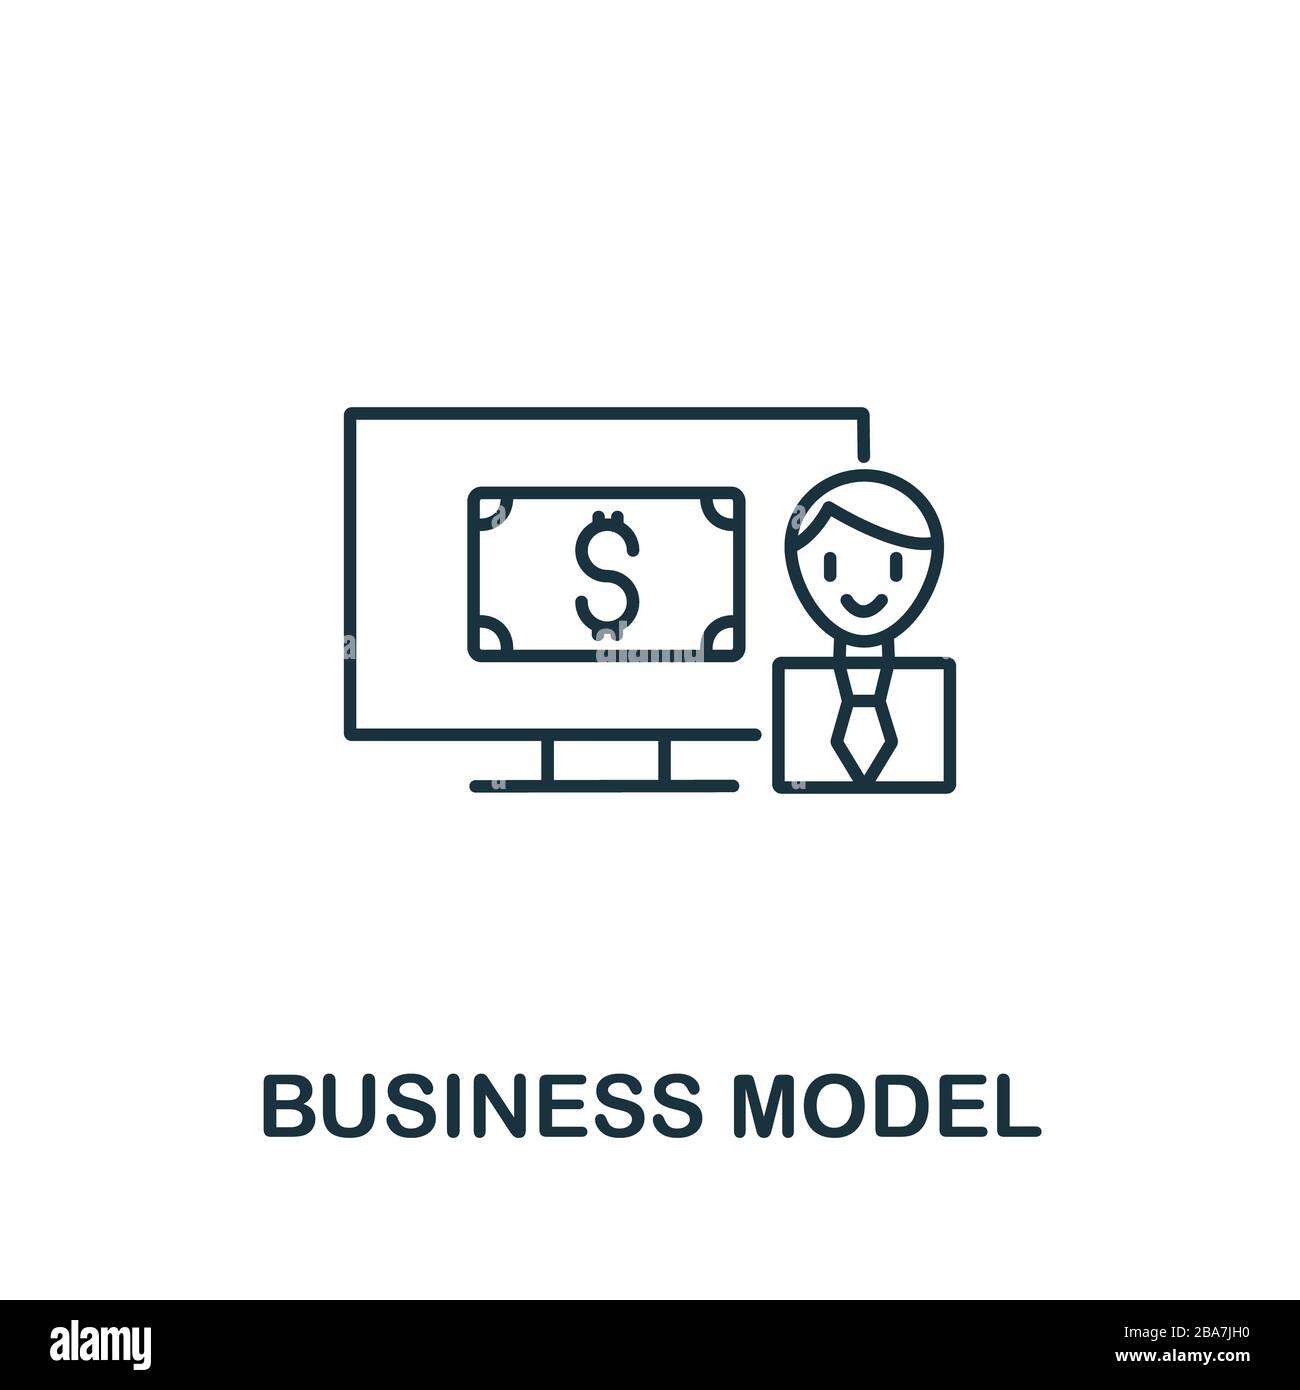 Business Model icon from industry 4.0 collection. Simple line element Business Model symbol for templates, web design and infographics Stock Photo